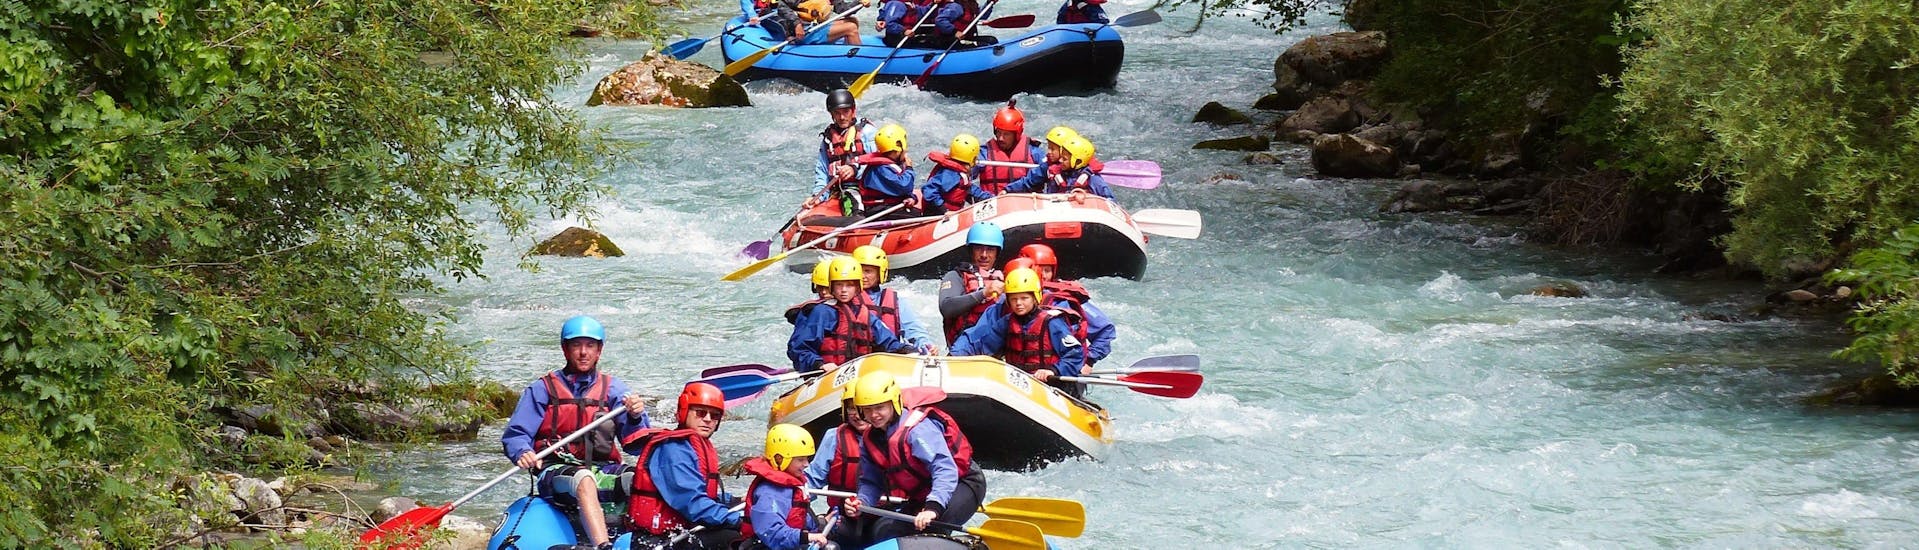 Several groups of  people are paddling during the Classic Rafting activity on the Higher Guisane with Eaurigine.